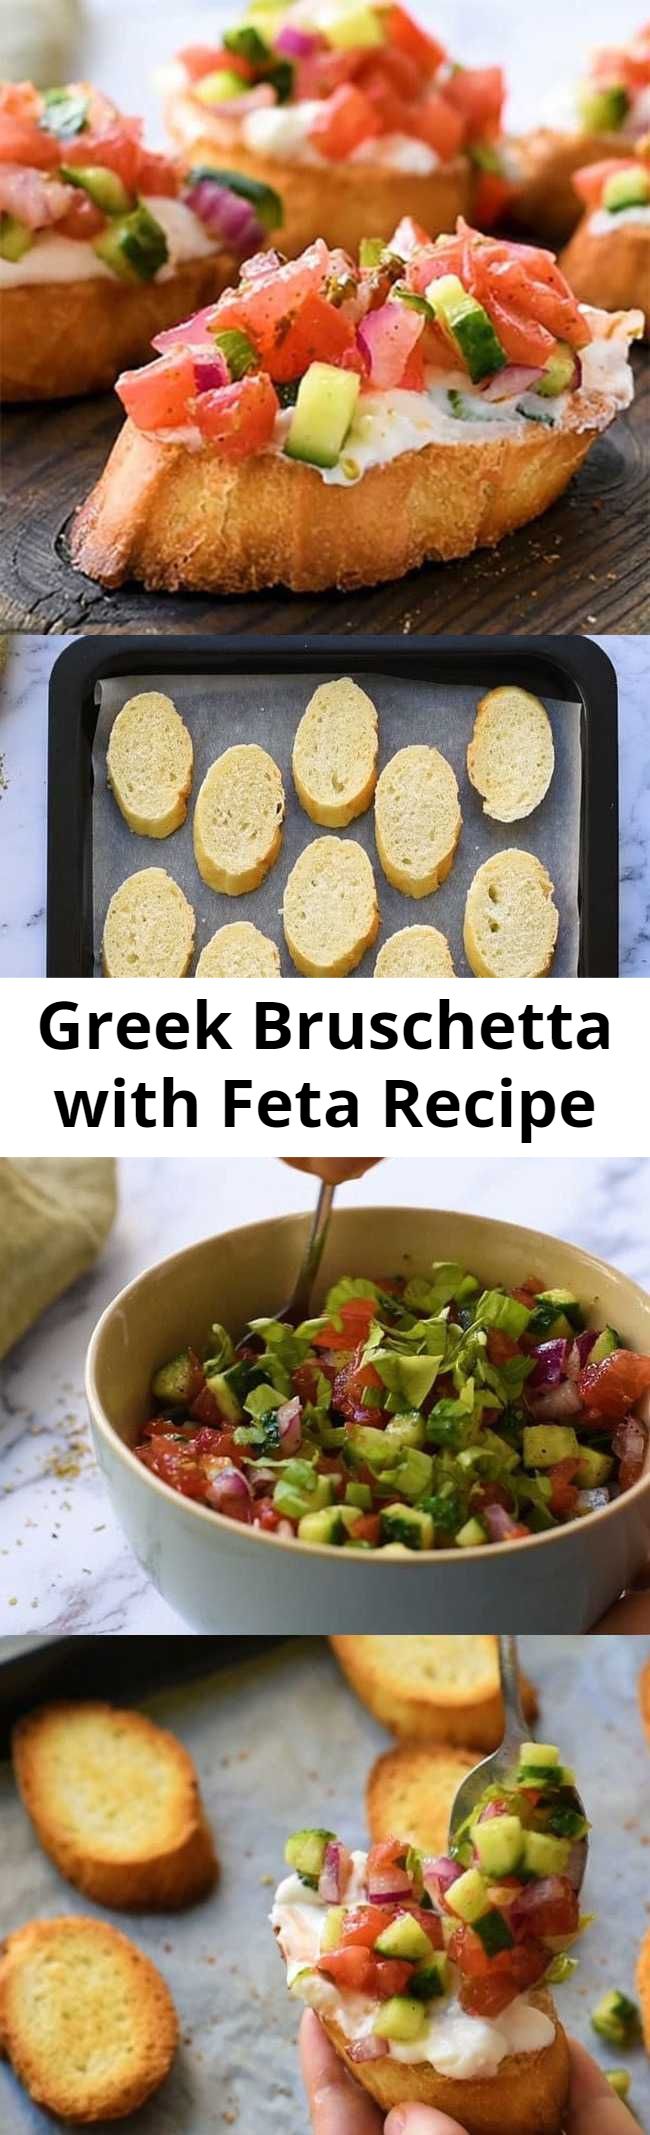 Greek Bruschetta with Feta - This appetizer recipe is loaded with flavor. Toasted bread - crostini- coated in a creamy feta spread and topped with tomato, cucumber, and red onion seasoned with Greek Vinaigrette. #bruschetta #greekbruschetta #appetizer #greekrecipe